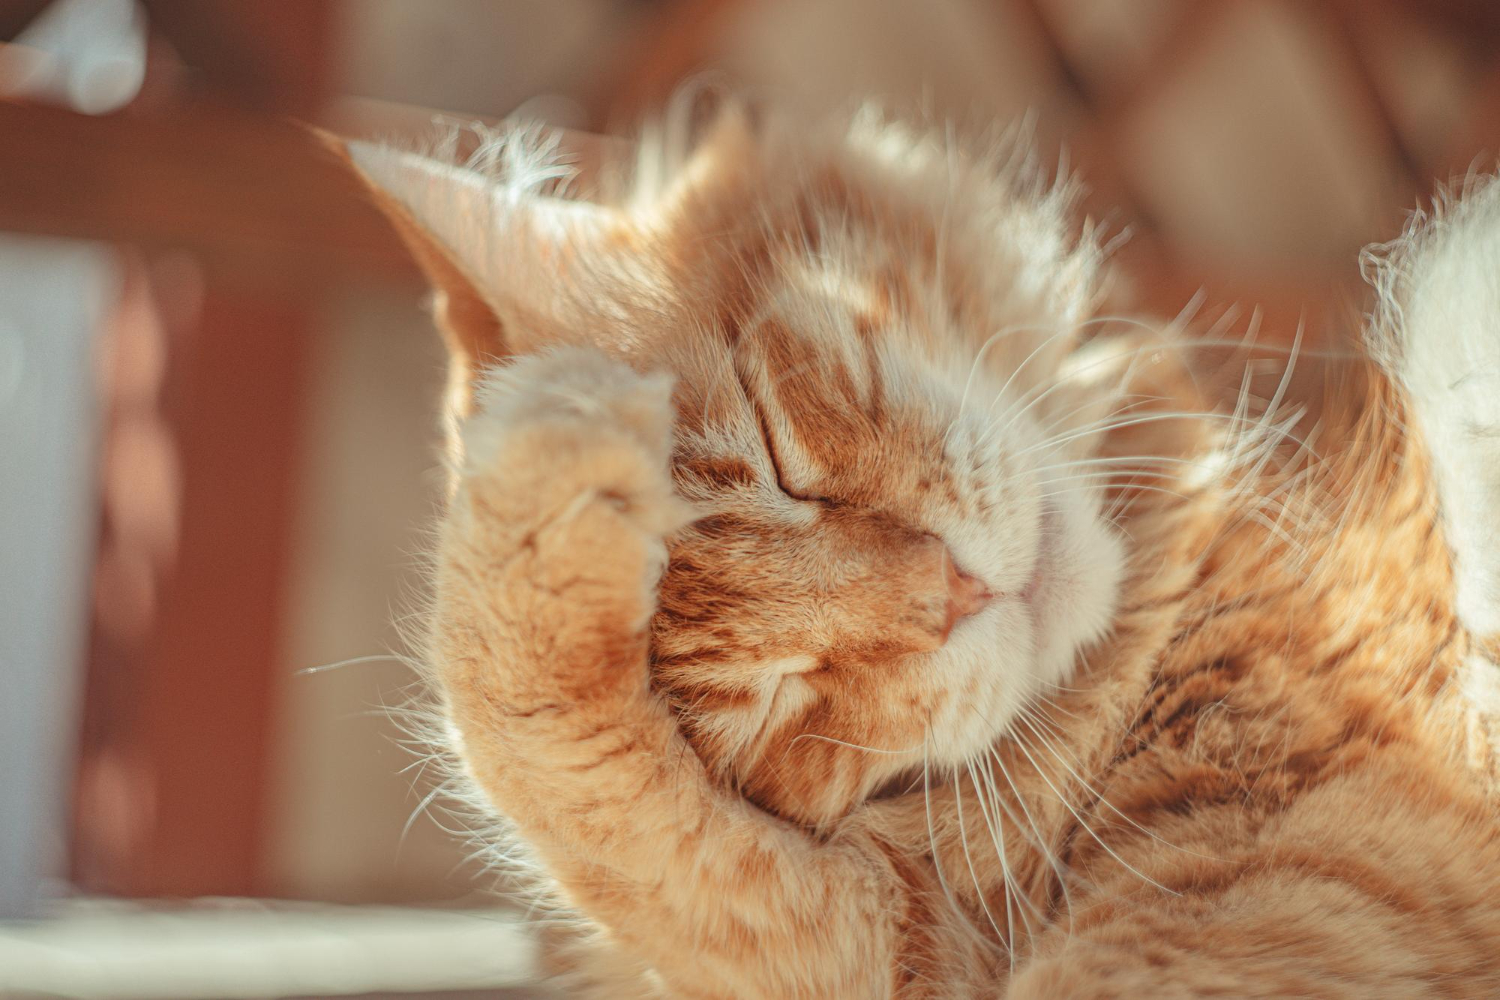 Is Your Cat's Face Rubbing Behavior Normal or Cause for Concern